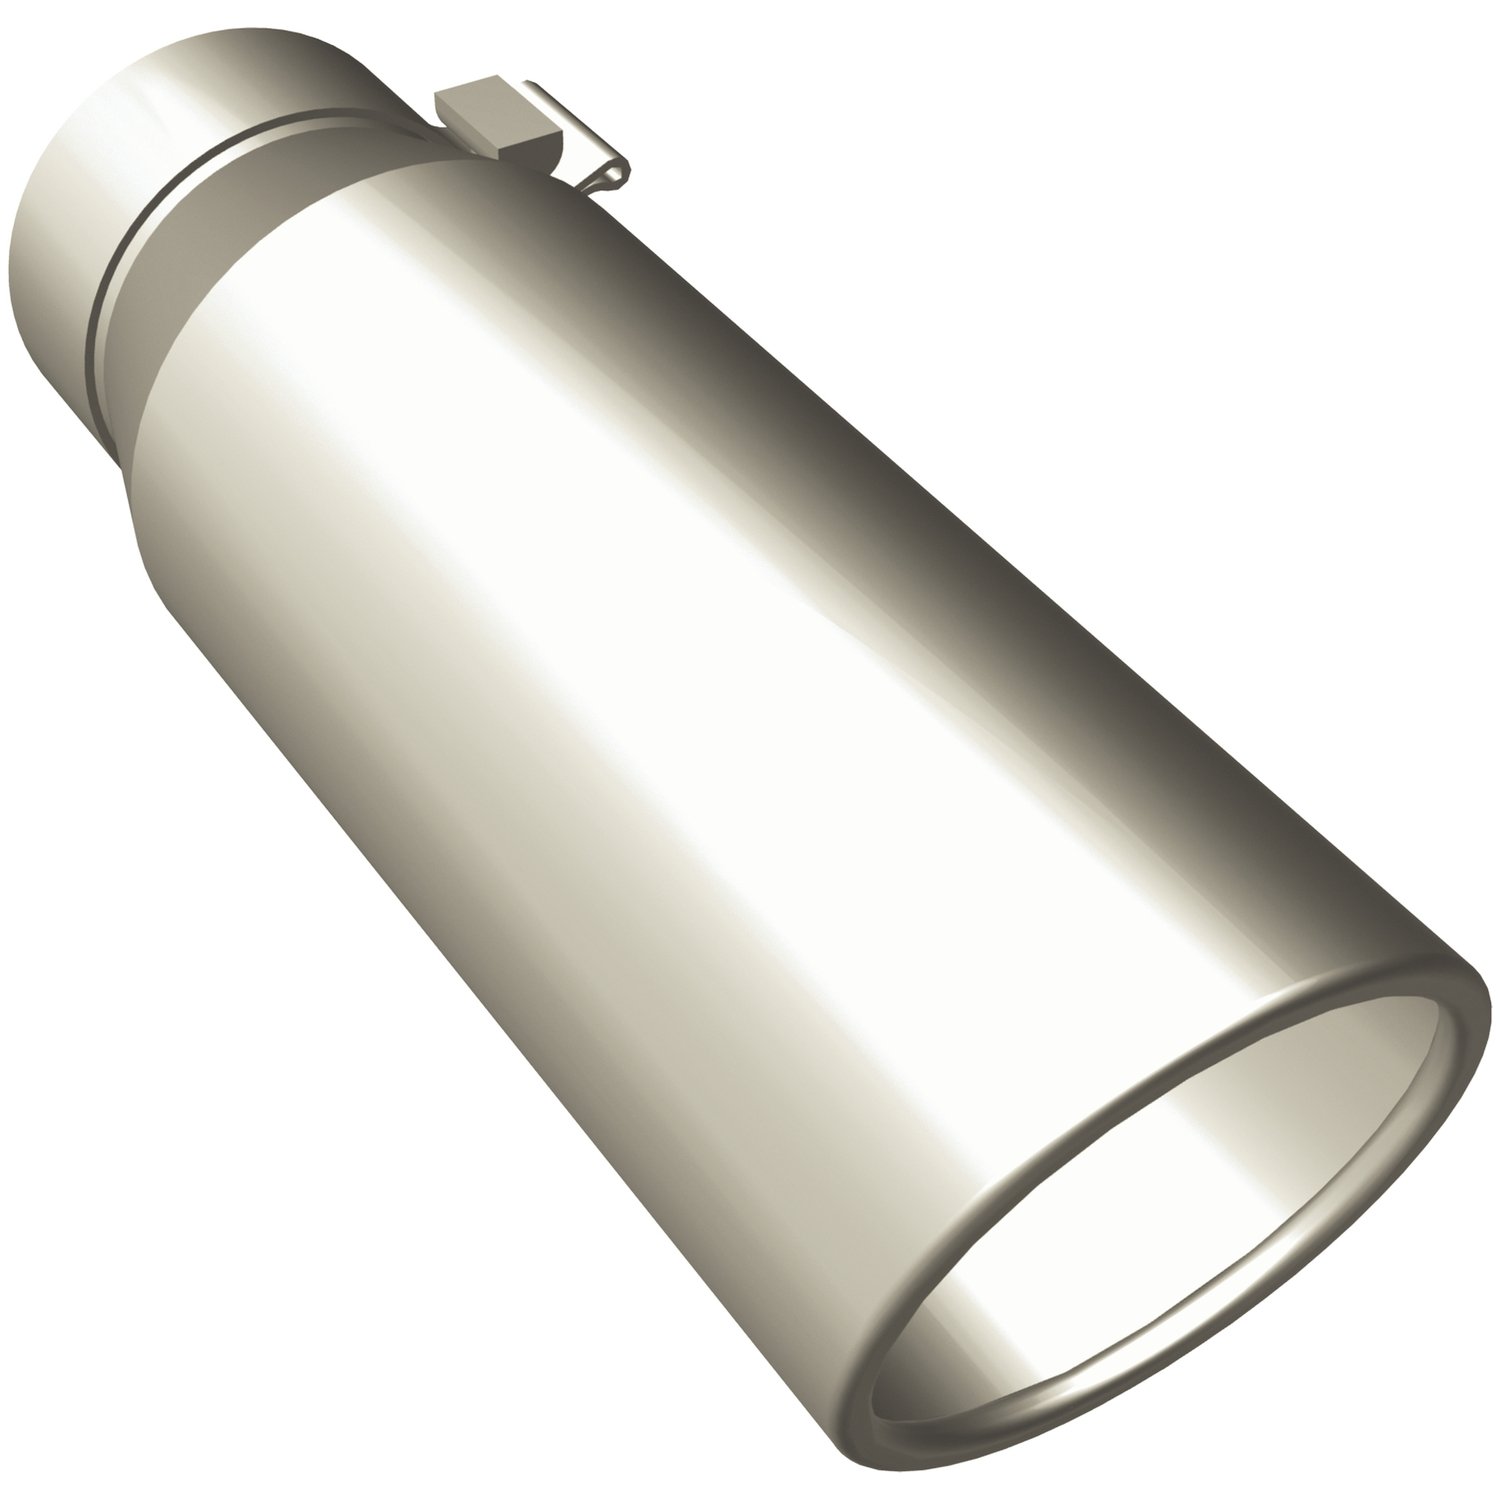 Polished Stainless Steel Clamp-On Single Exhaust Tip Inlet Inside Diameter: 3"